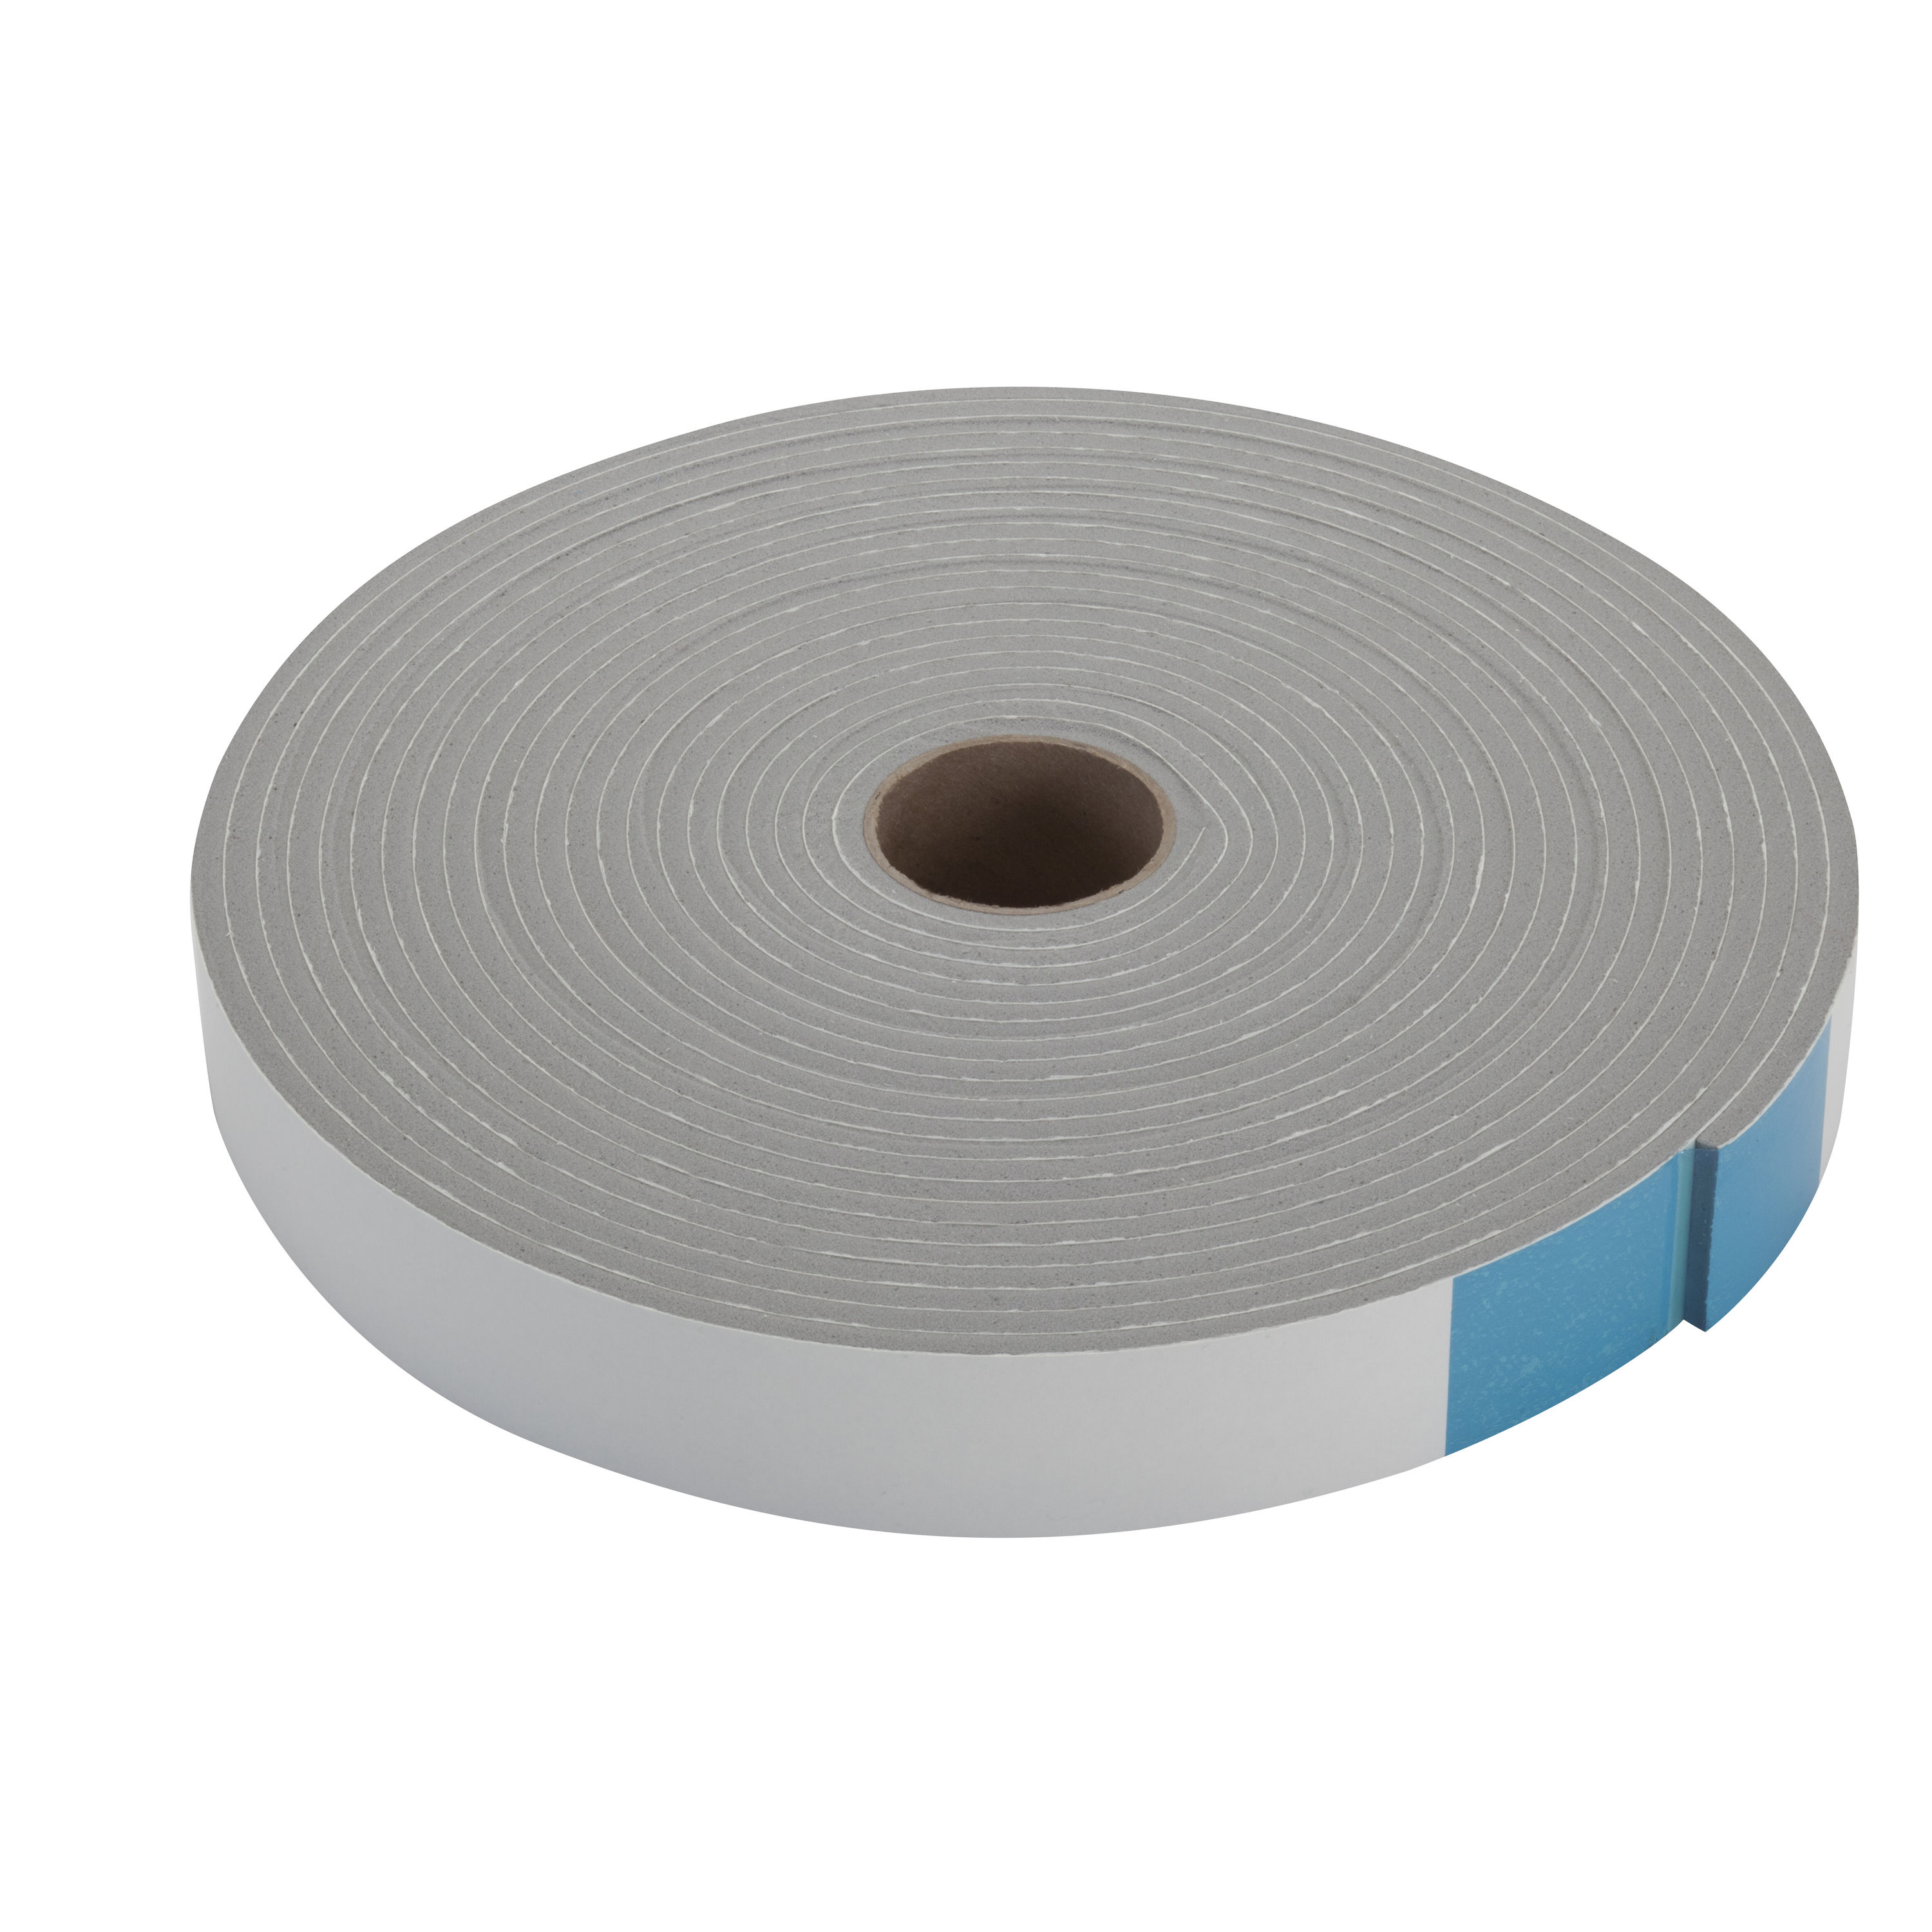 Self Adhesive Foam Tape Weatherstrip 1In x 3/8In x 20Ft High Density Foam  Insulation Strips Foam Seal Weather Stripping with Strong Adhesive for Door